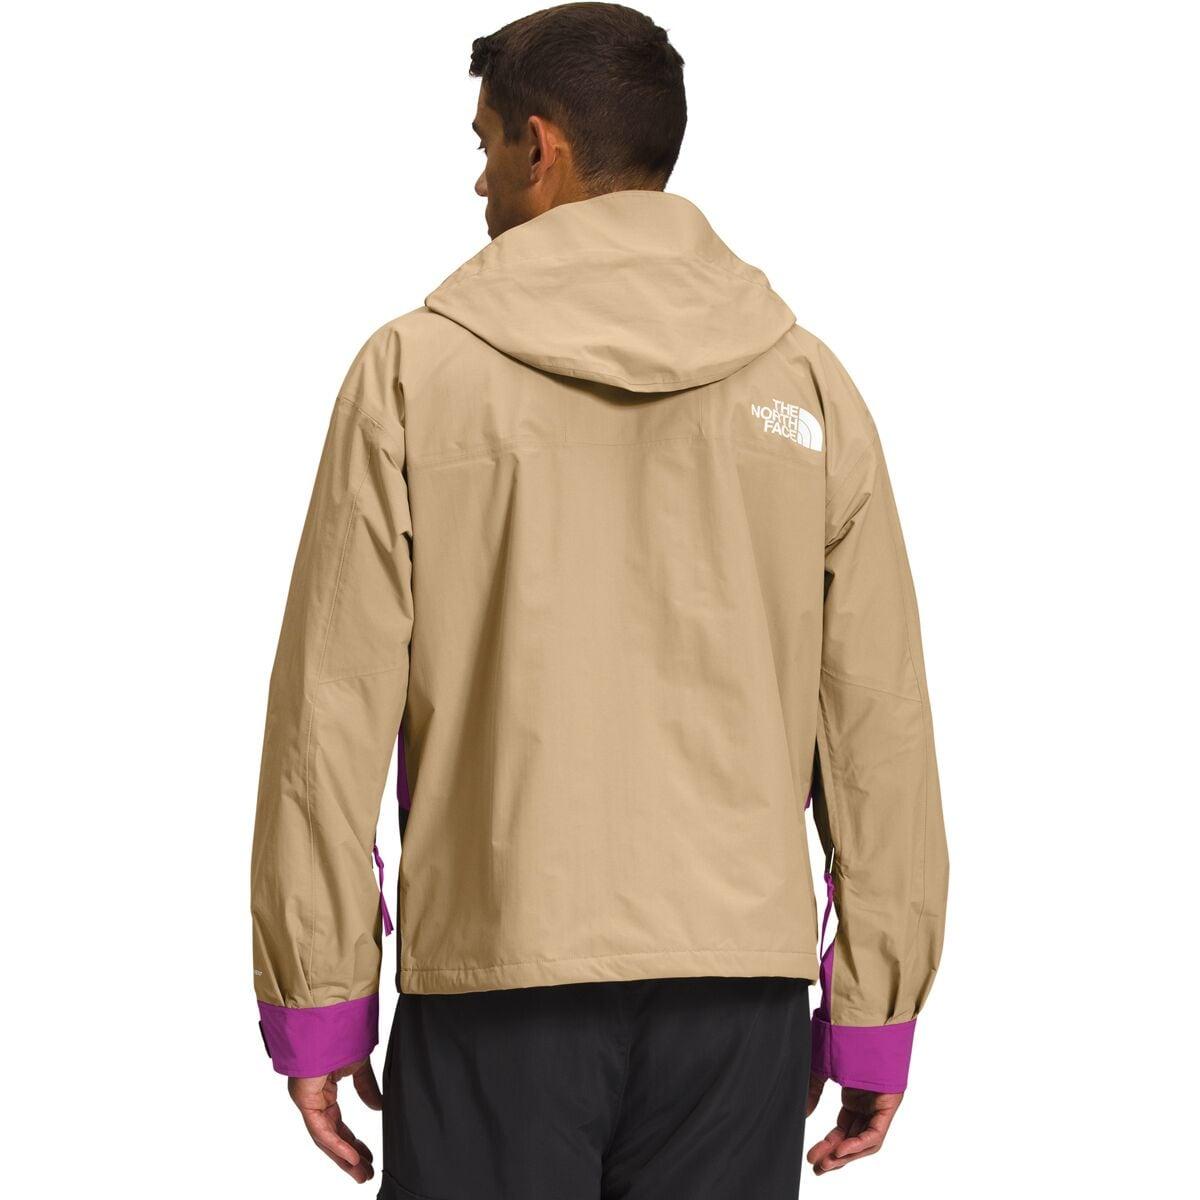 Jackets The North Face 86 Retro Mountain Jacket Coal Brown Wtrdstp/ TNF  Black